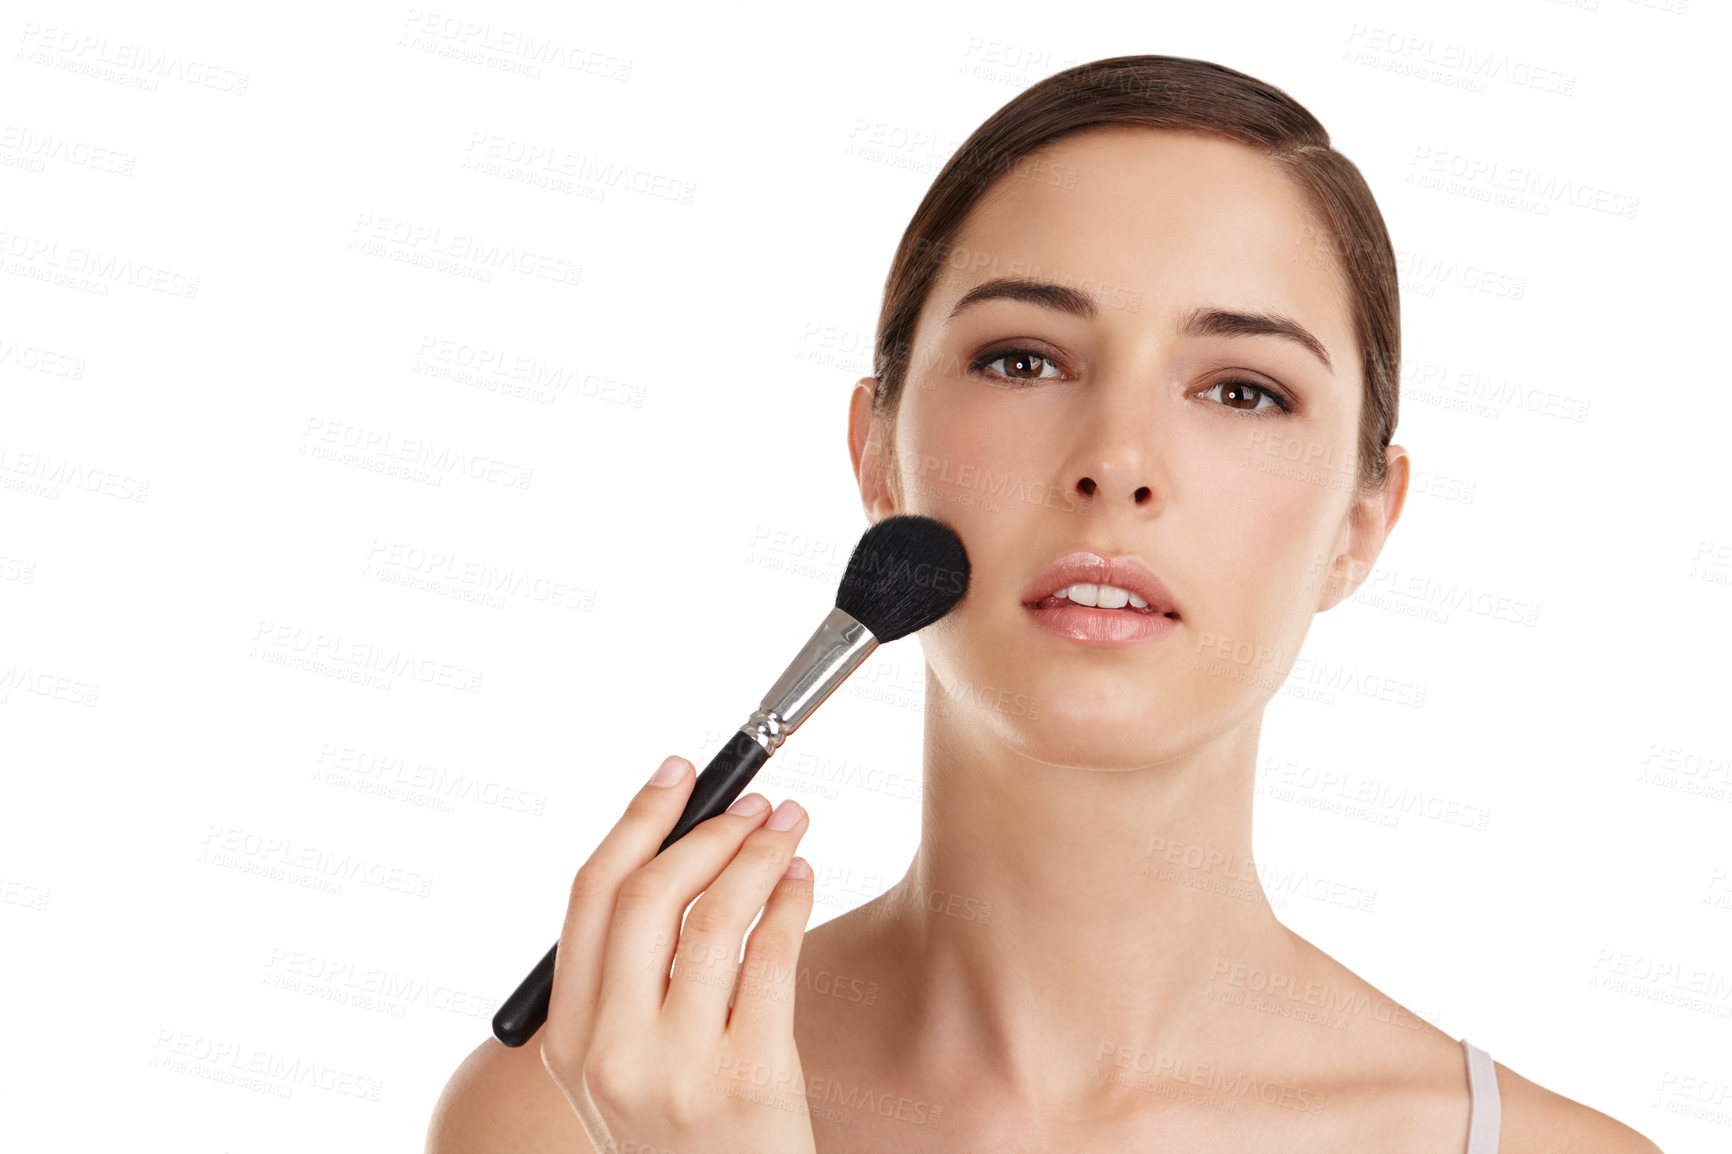 Buy stock photo Cropped portrait of a beautiful young woman applying blusher against a white background